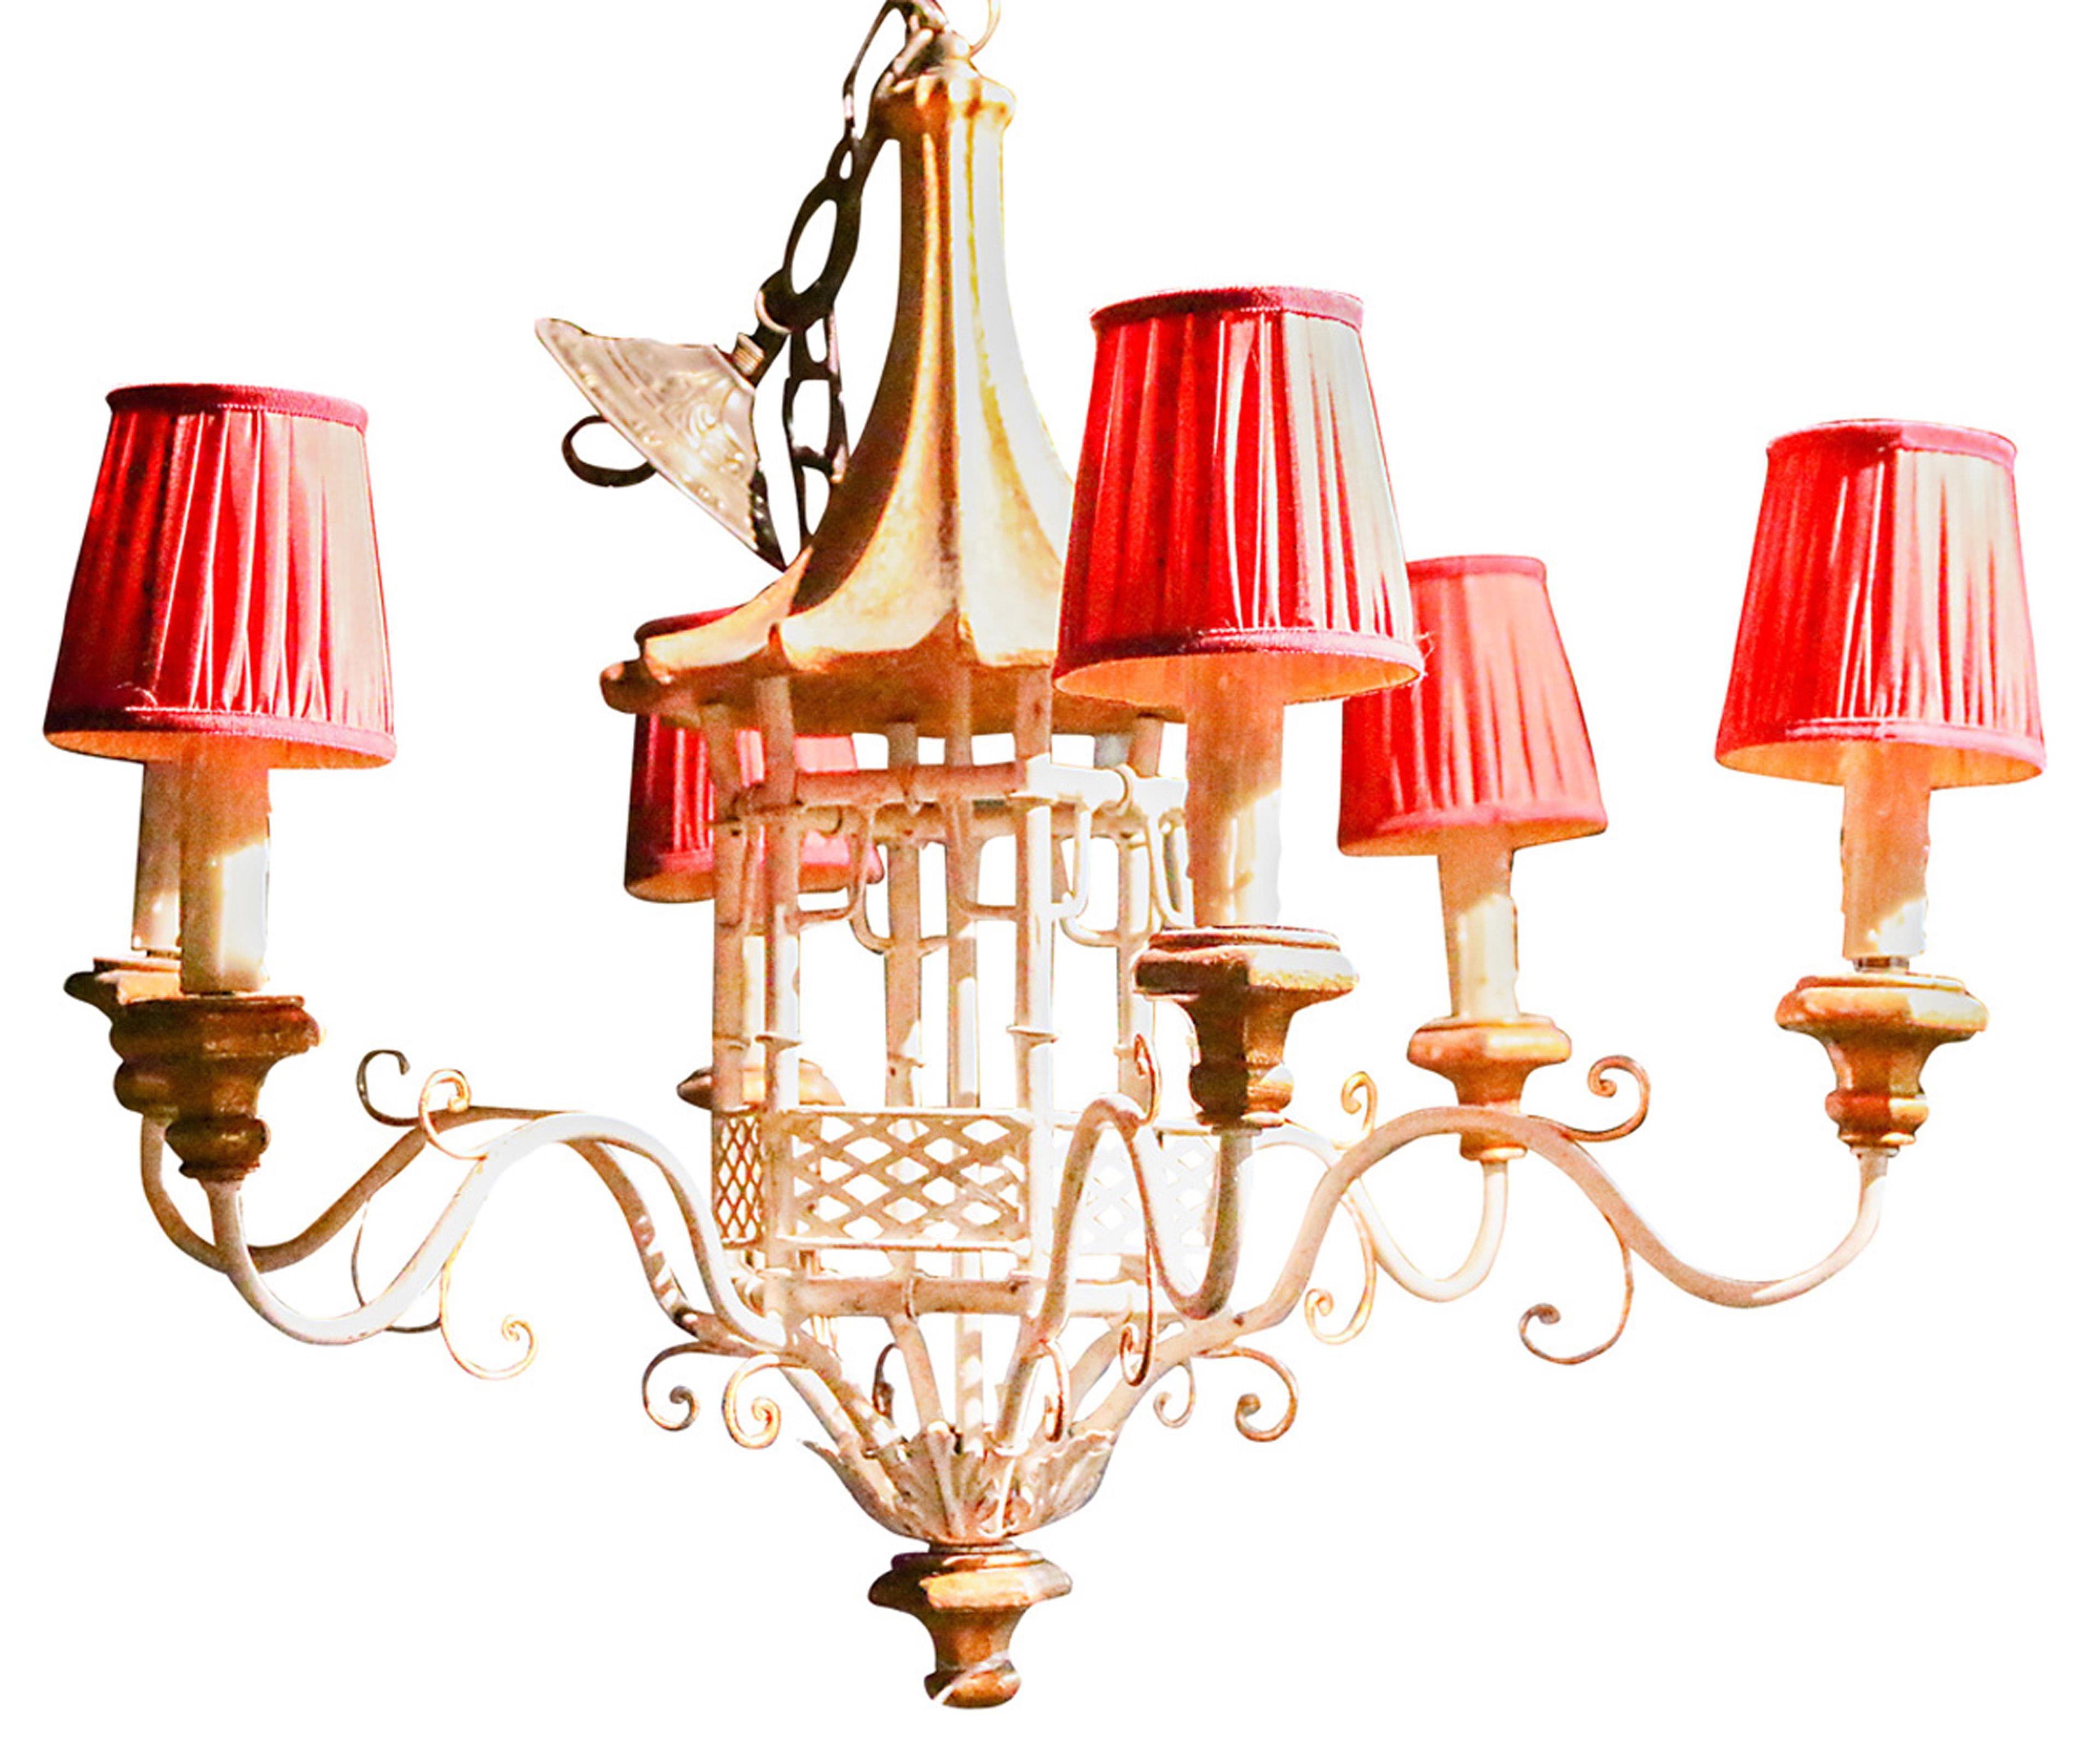 Painted 19th Century Chinoiserie Decorated Chandelier For Sale